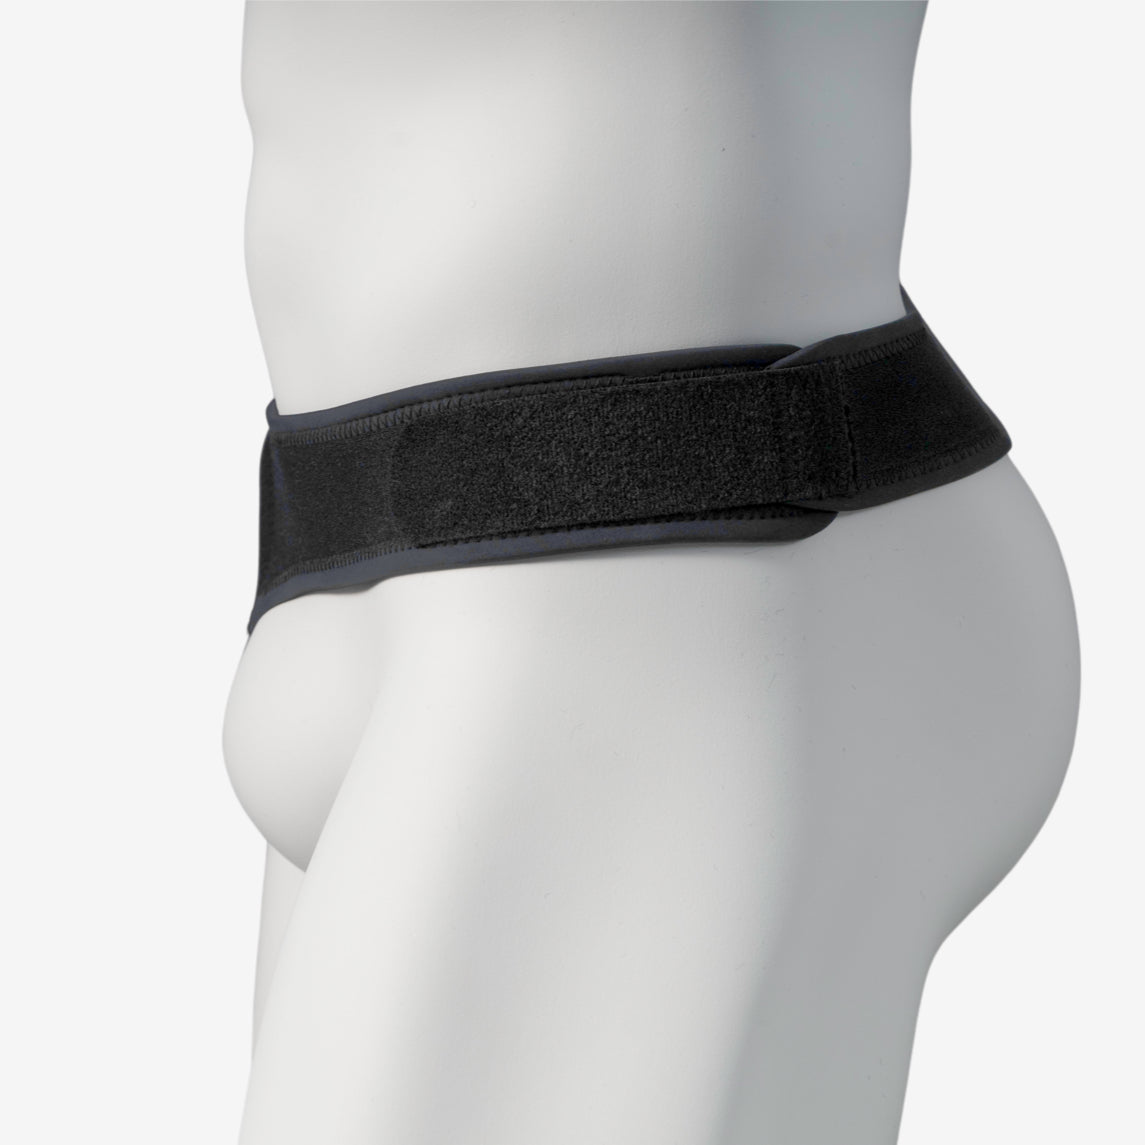 Allied Medical  Comfort-Truss Hernia Support Belt Double Side